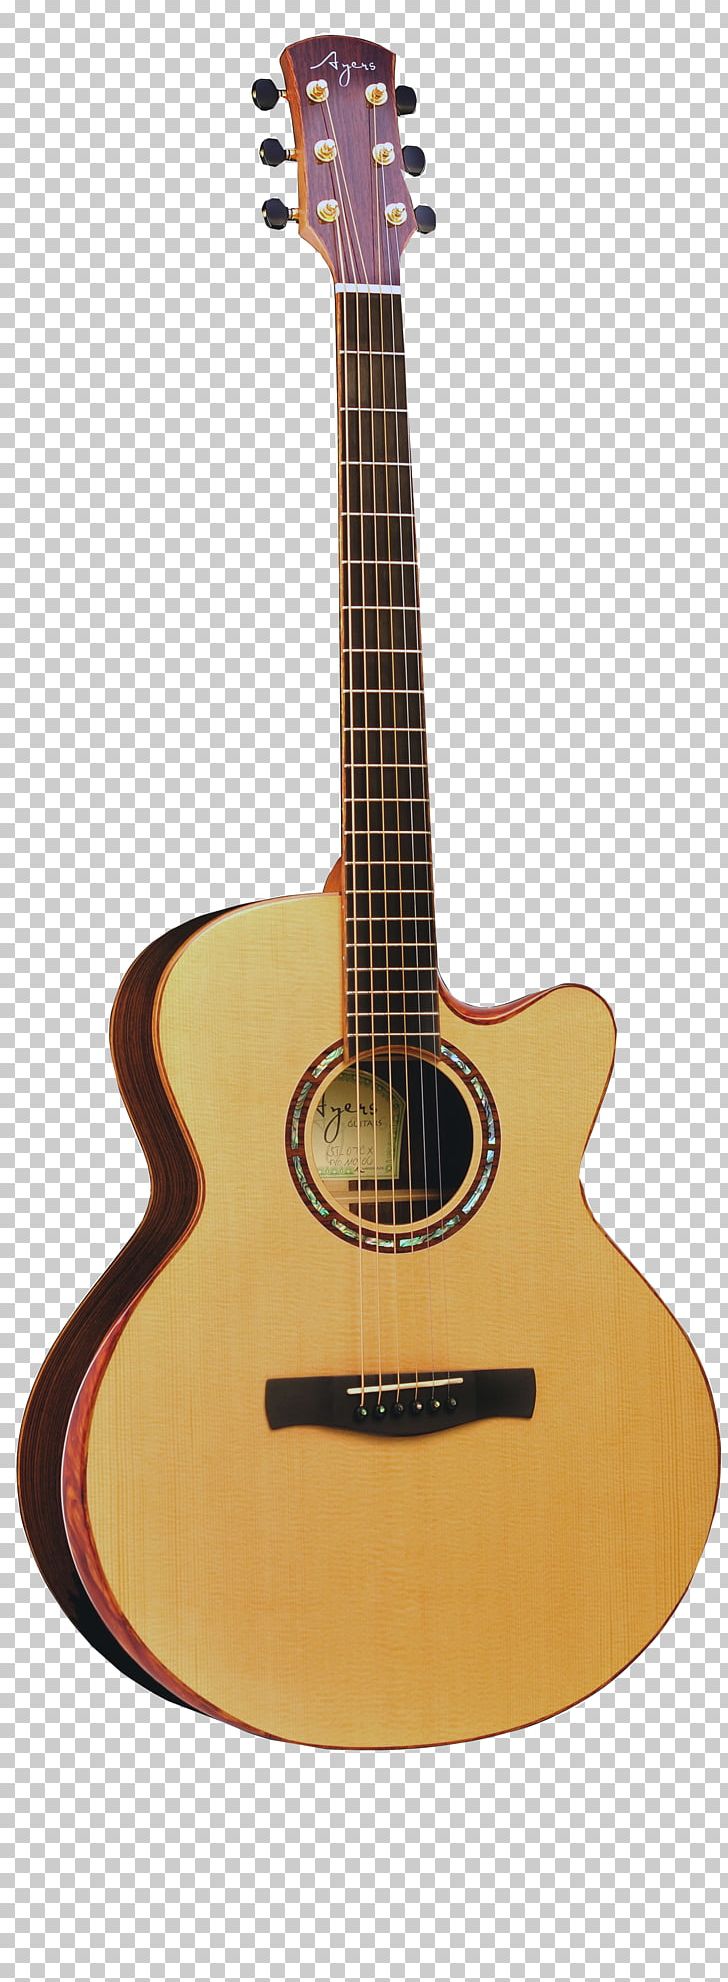 Acoustic-electric Guitar Fender Musical Instruments Corporation Dreadnought Acoustic Guitar PNG, Clipart, Acoustic Electric Guitar, Classical Guitar, Cuatro, Cutaway, Guitar Accessory Free PNG Download